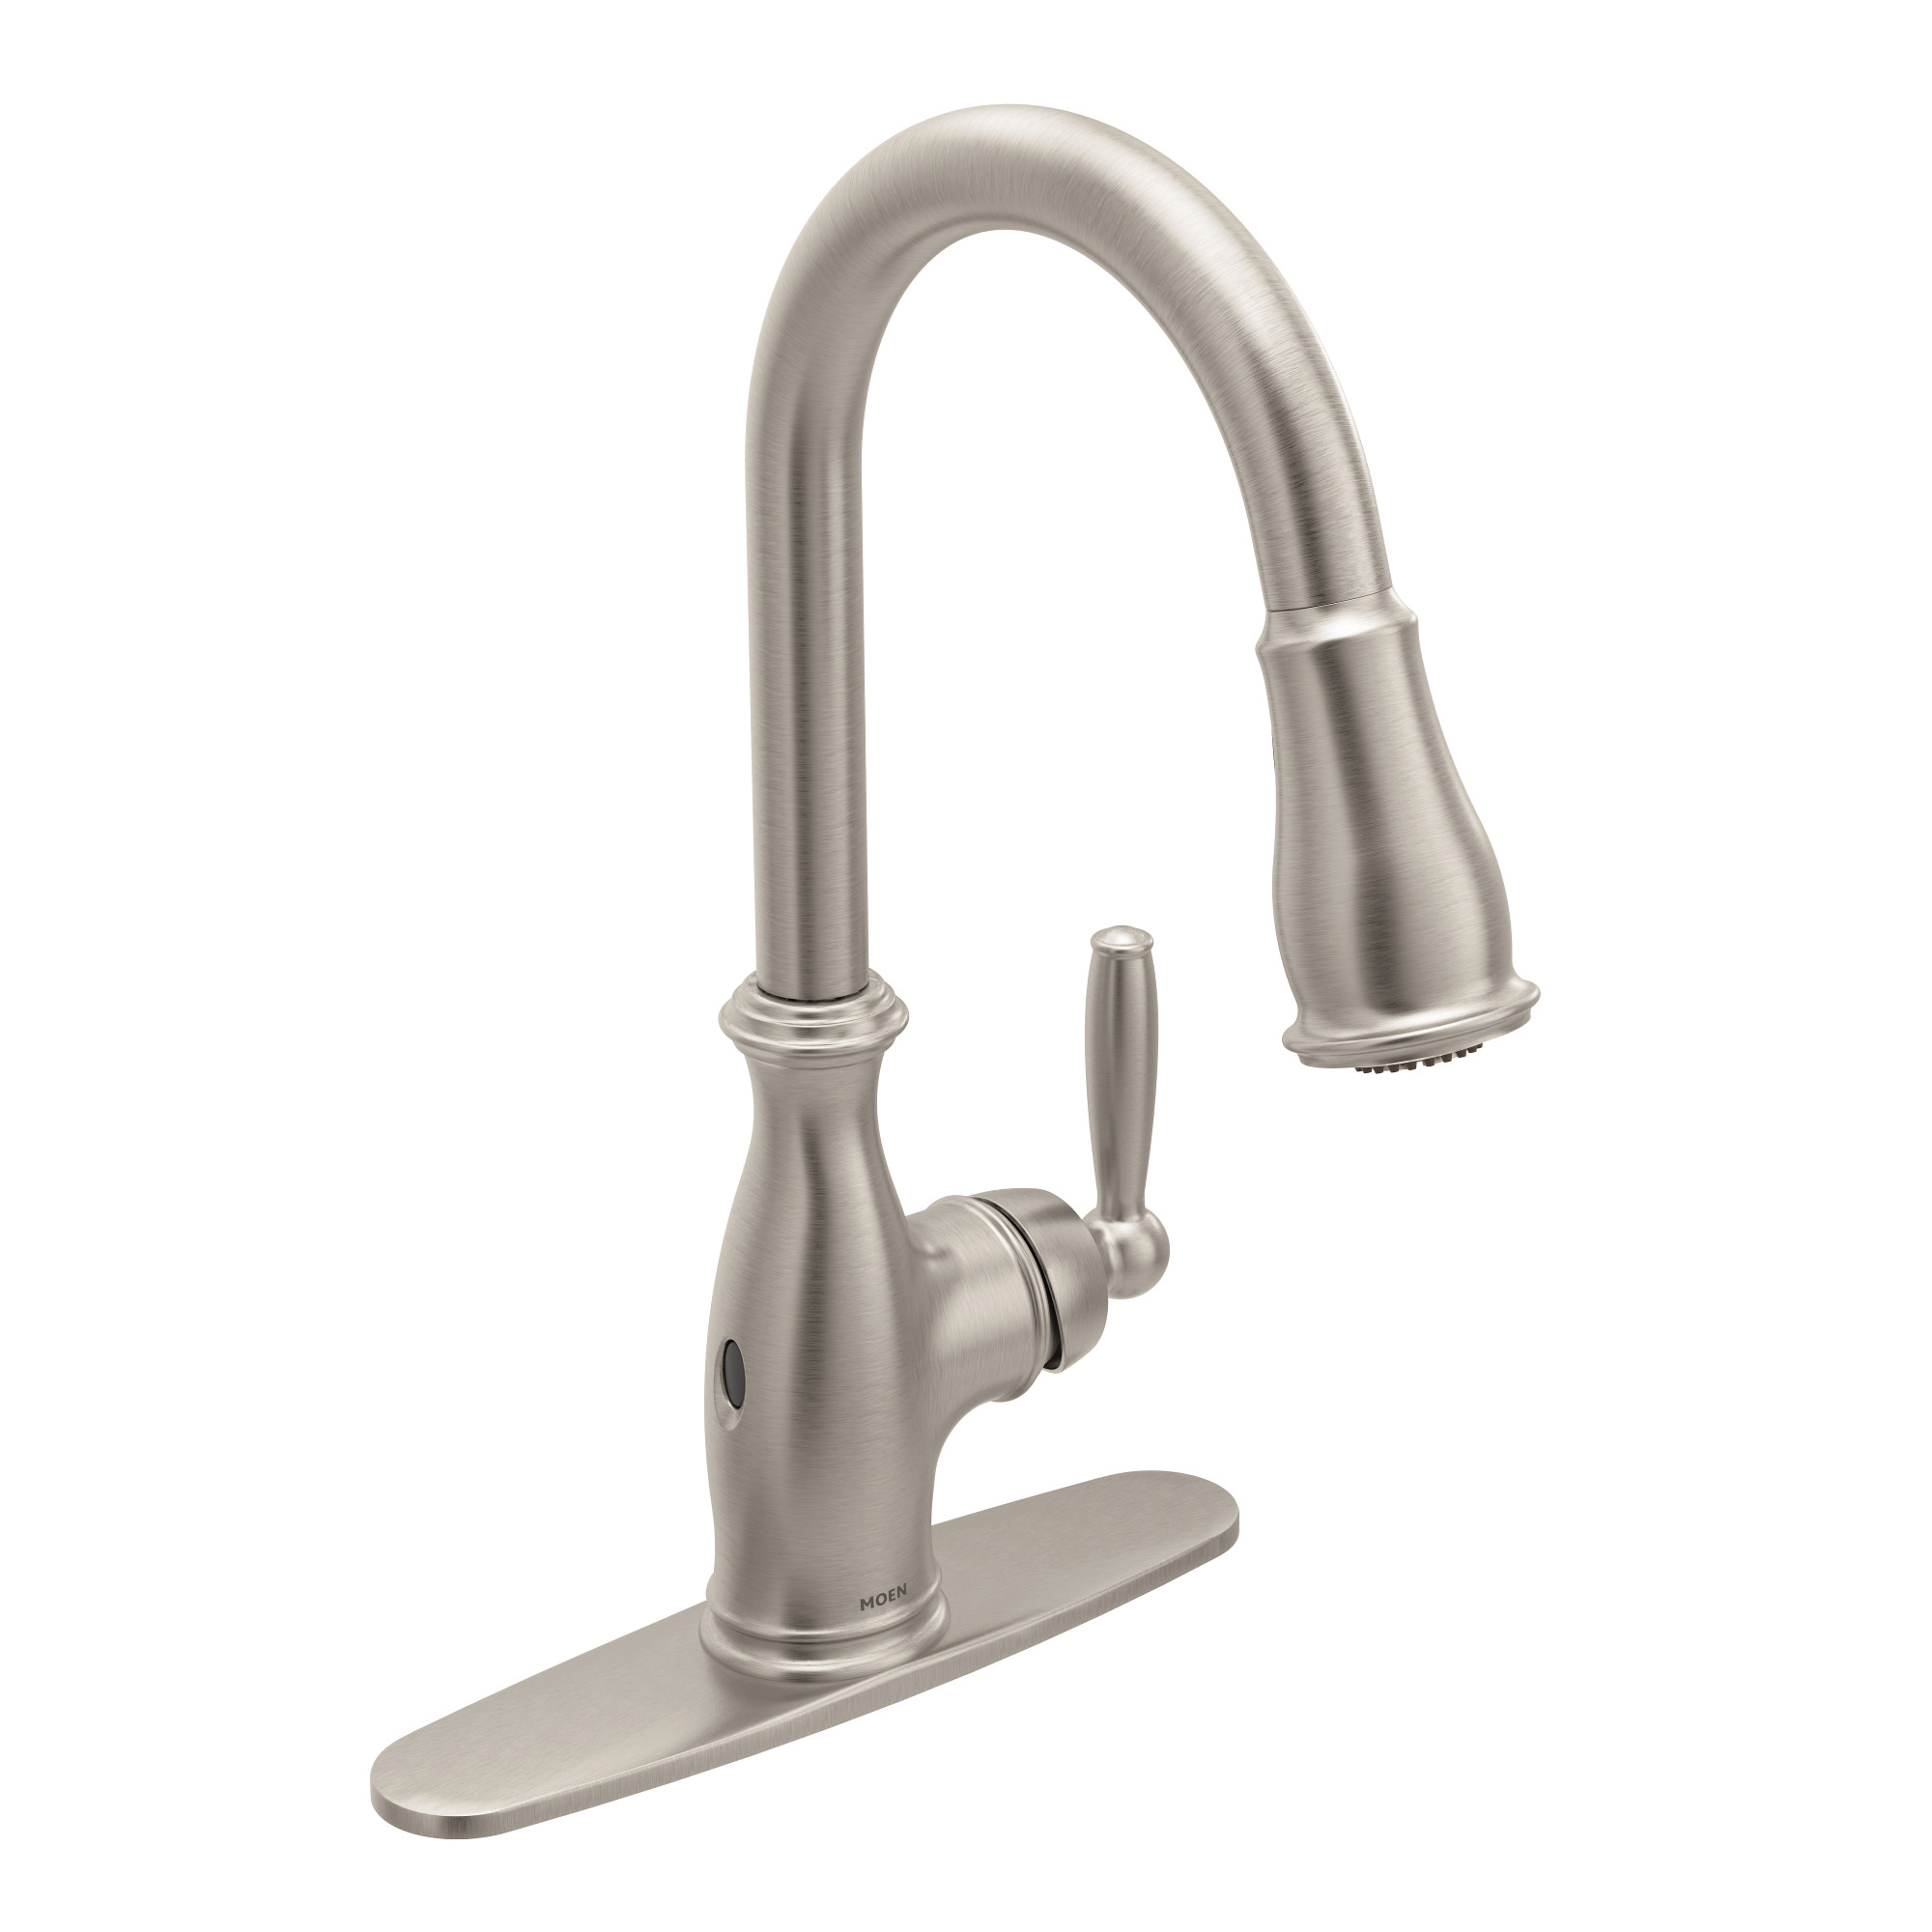 Moen 7185ew Brantford 15 Gpm 1 Hole Pull Down Kitchen Faucet For Sale Online